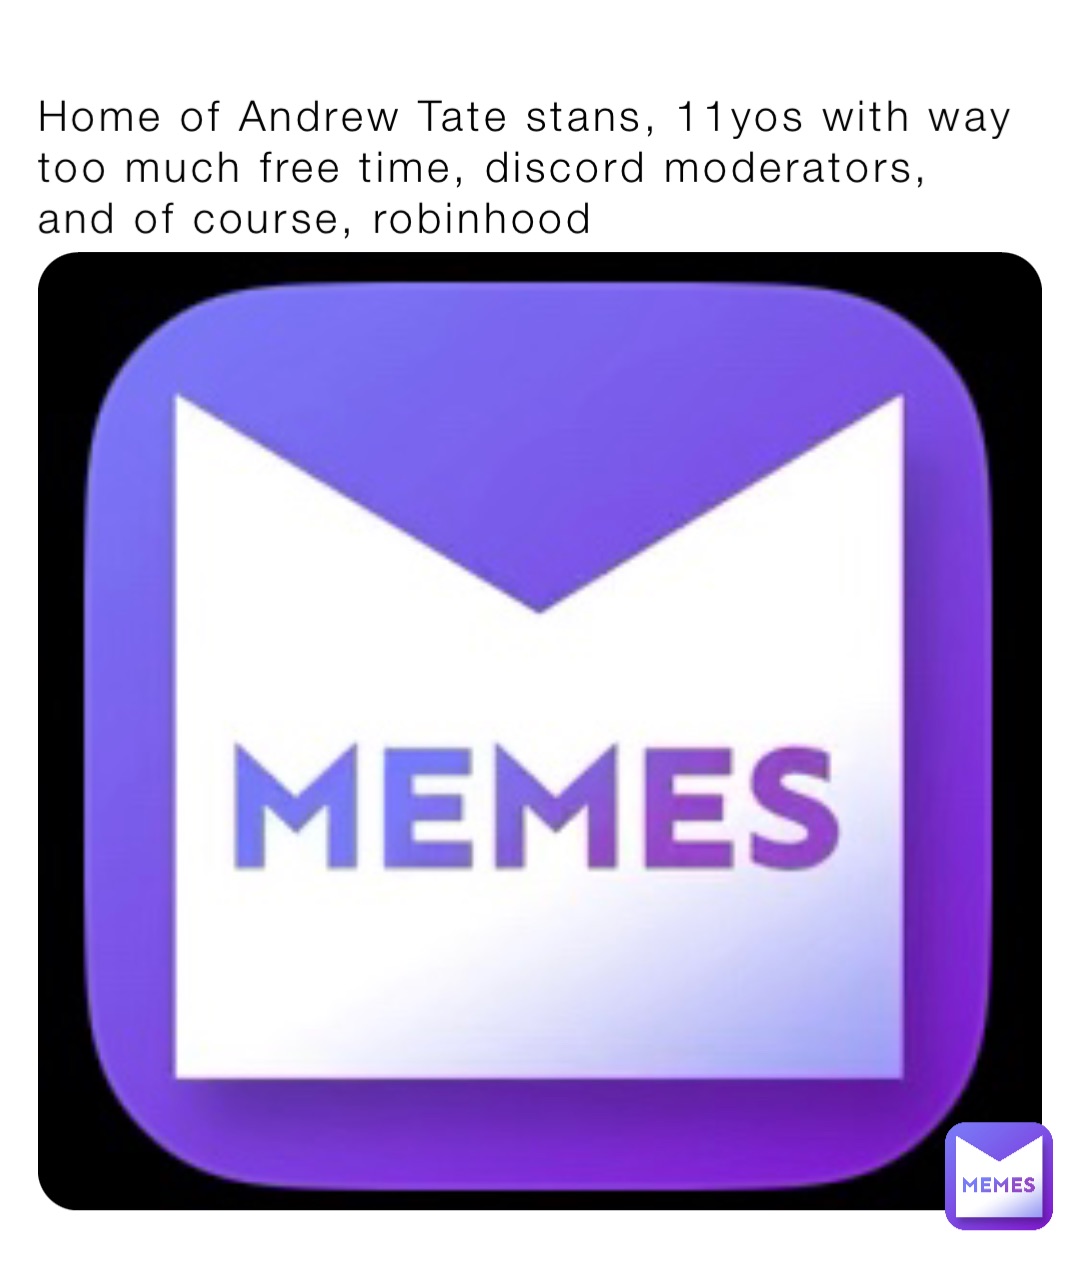 Home of Andrew Tate stans, 11yos with way too much free time, discord moderators, and of course, robinhood